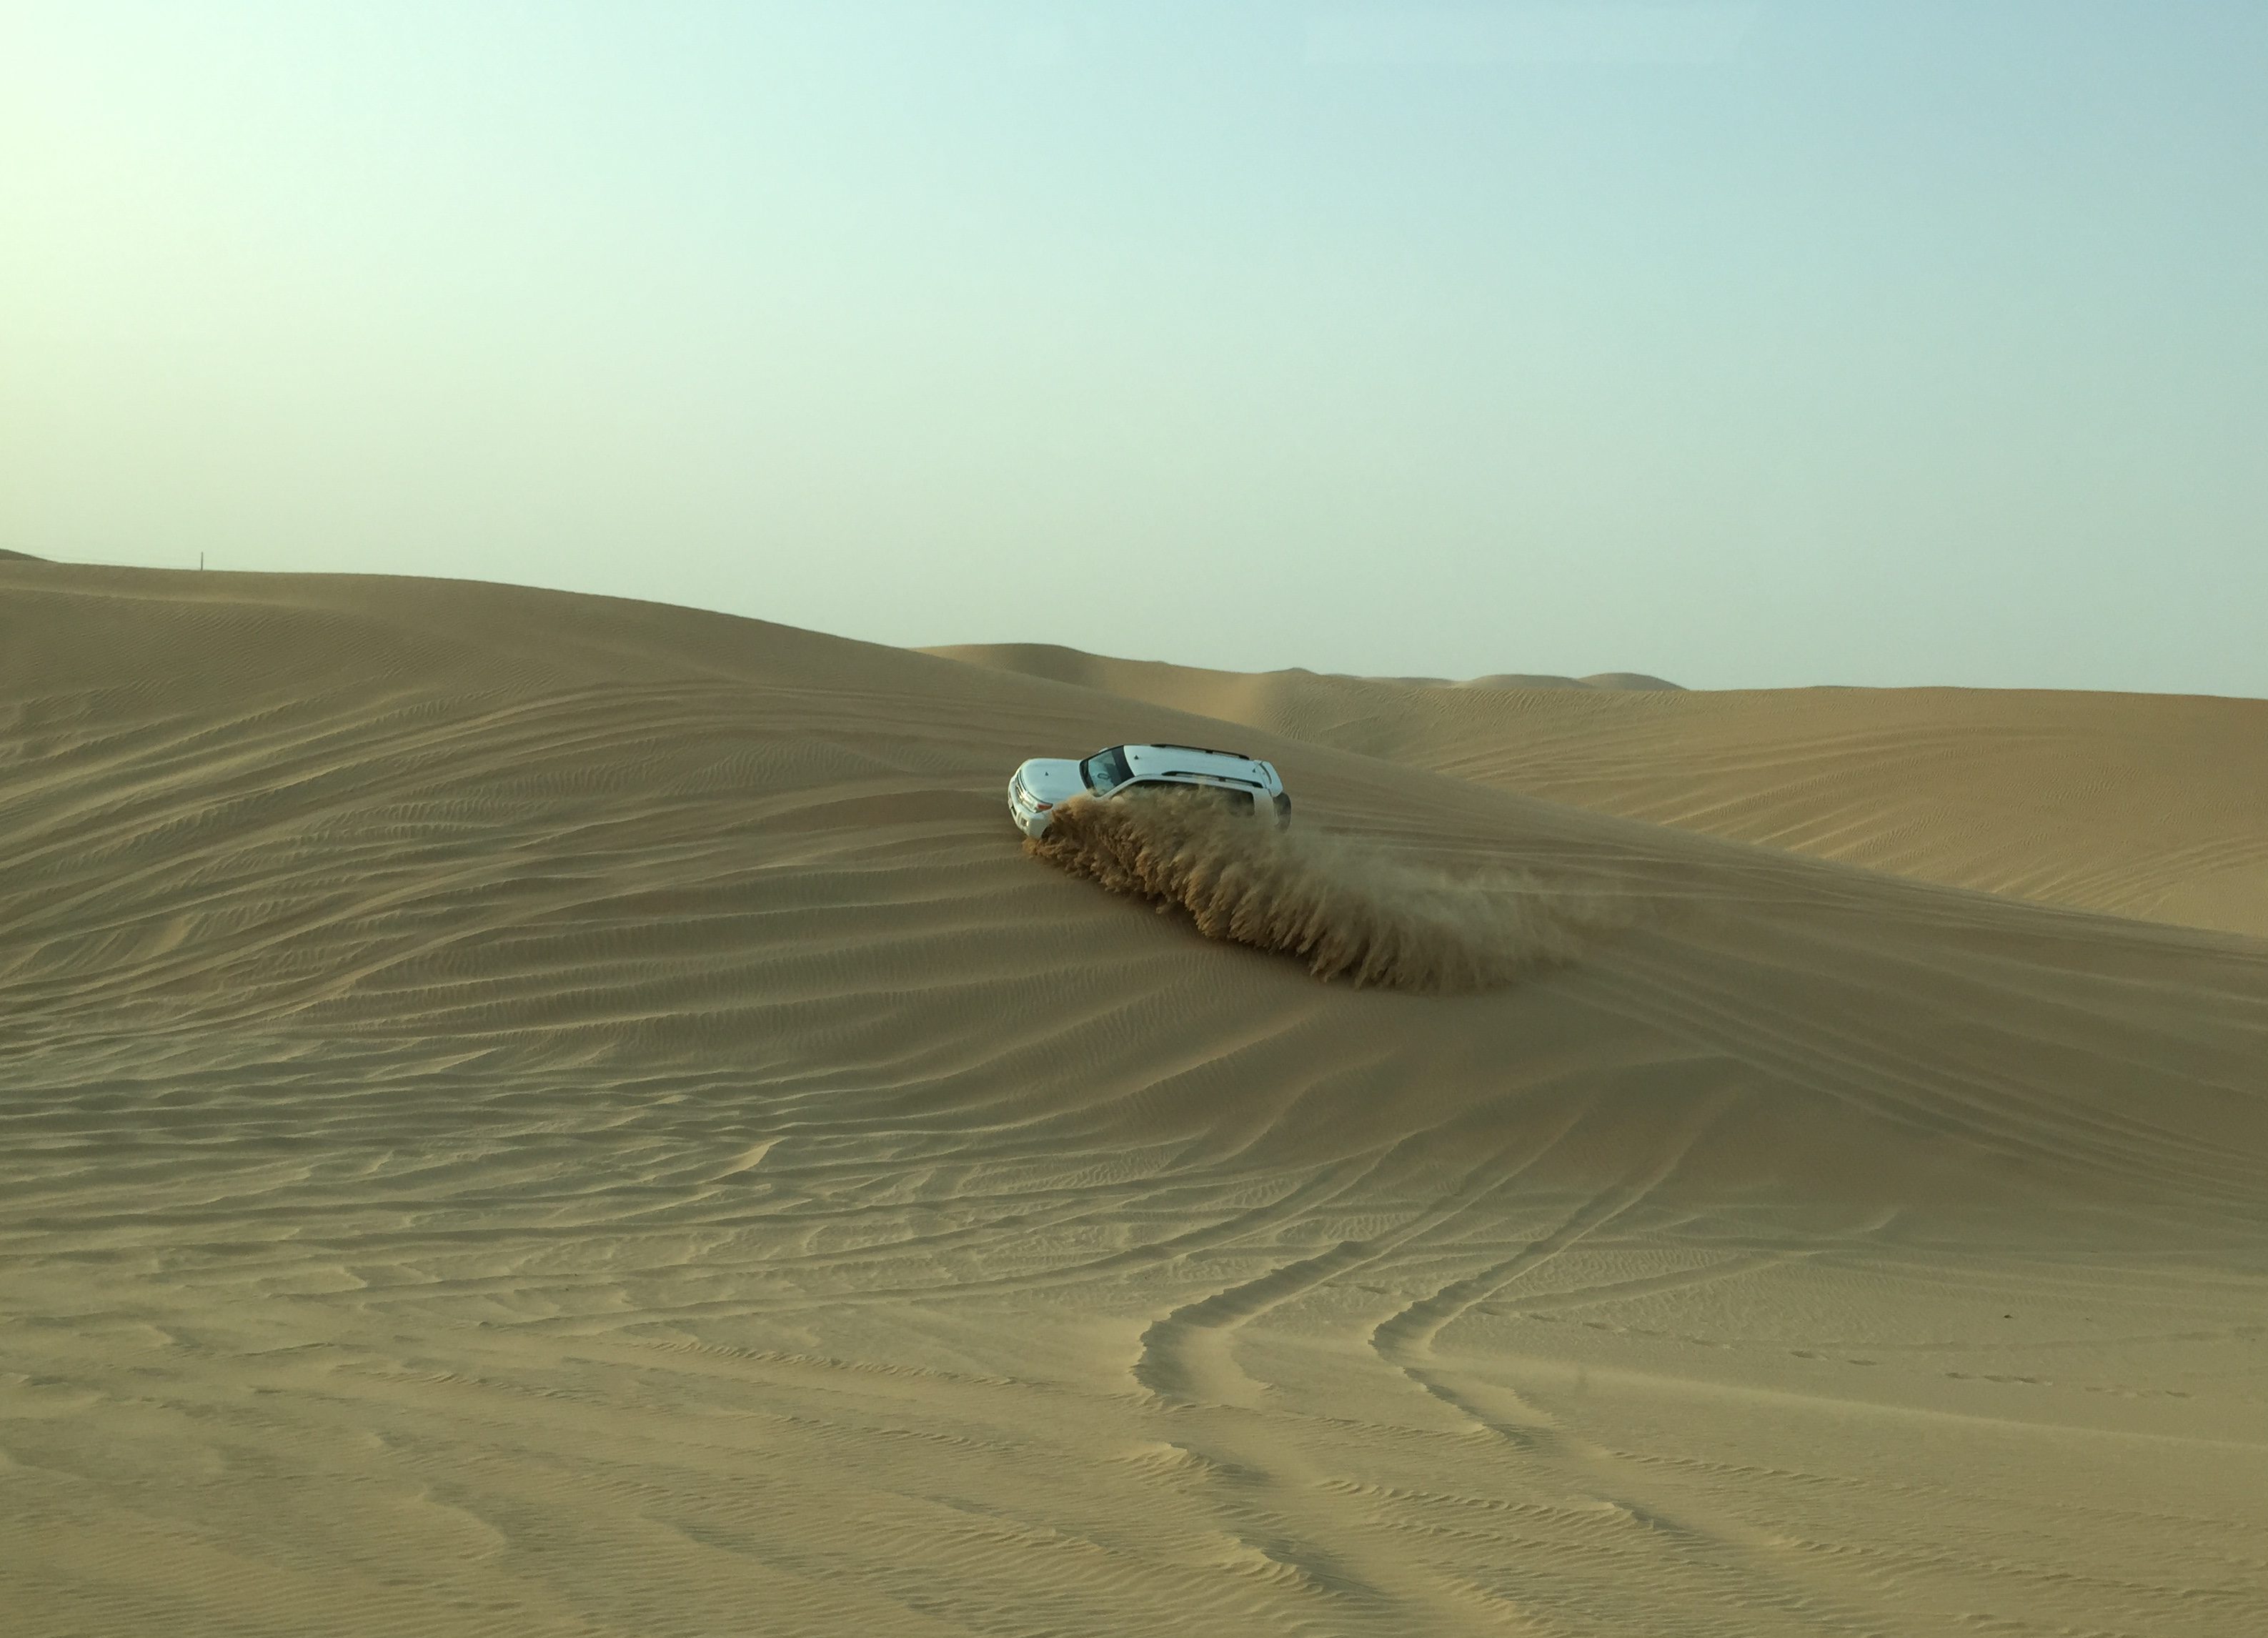 Dune bashing in Abu Dhabi is not for the faint of heart (or stomach)